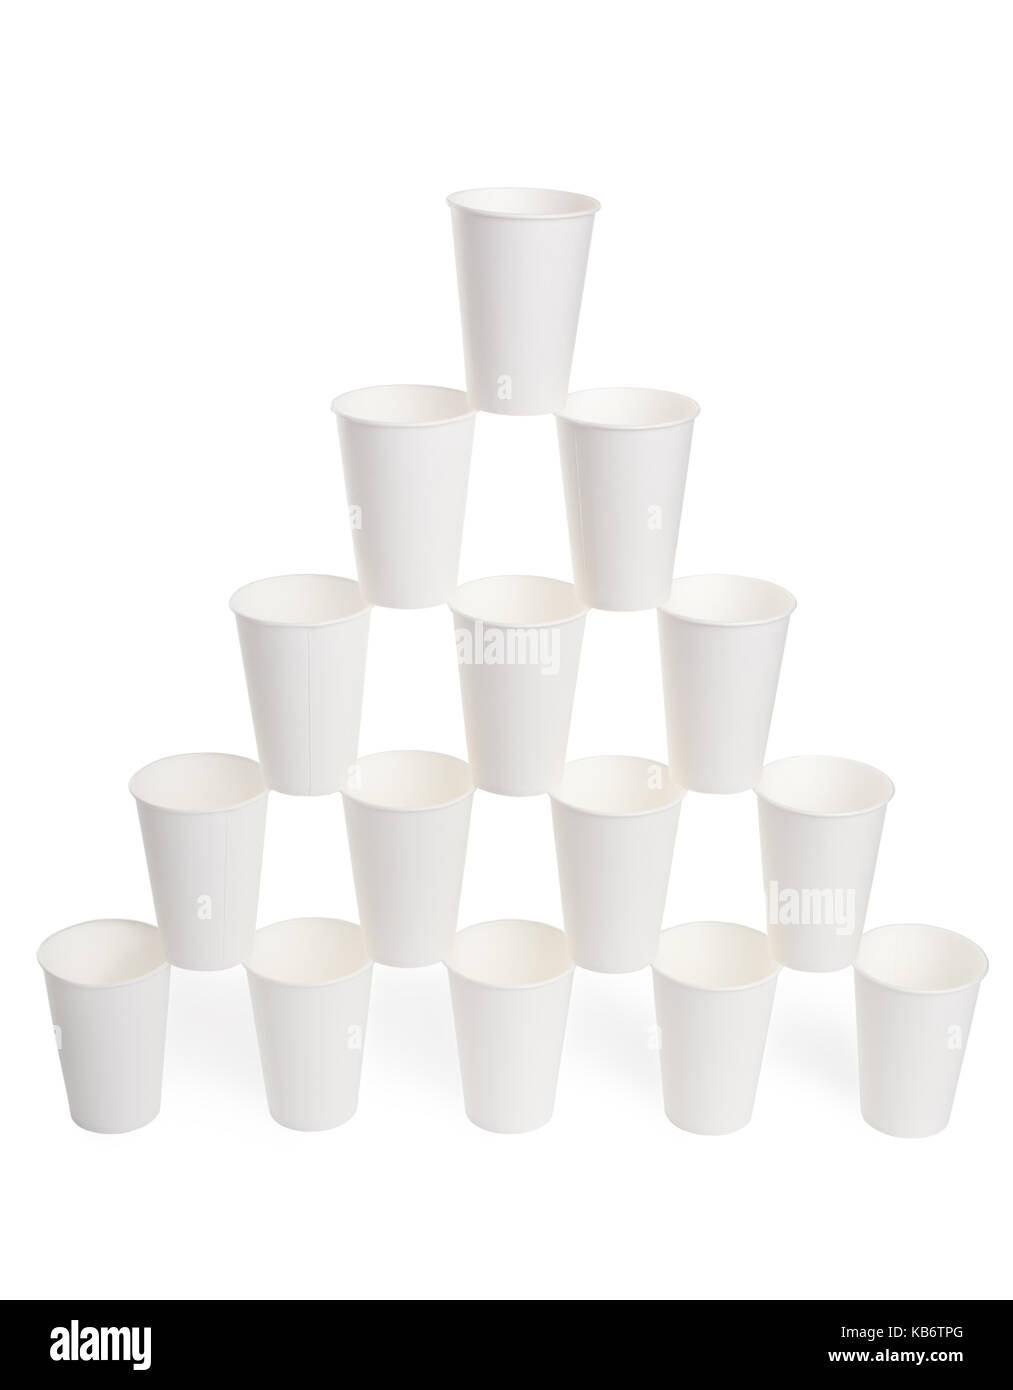 Pyramid of white disposable paper cups isolated on white background Stock Photo